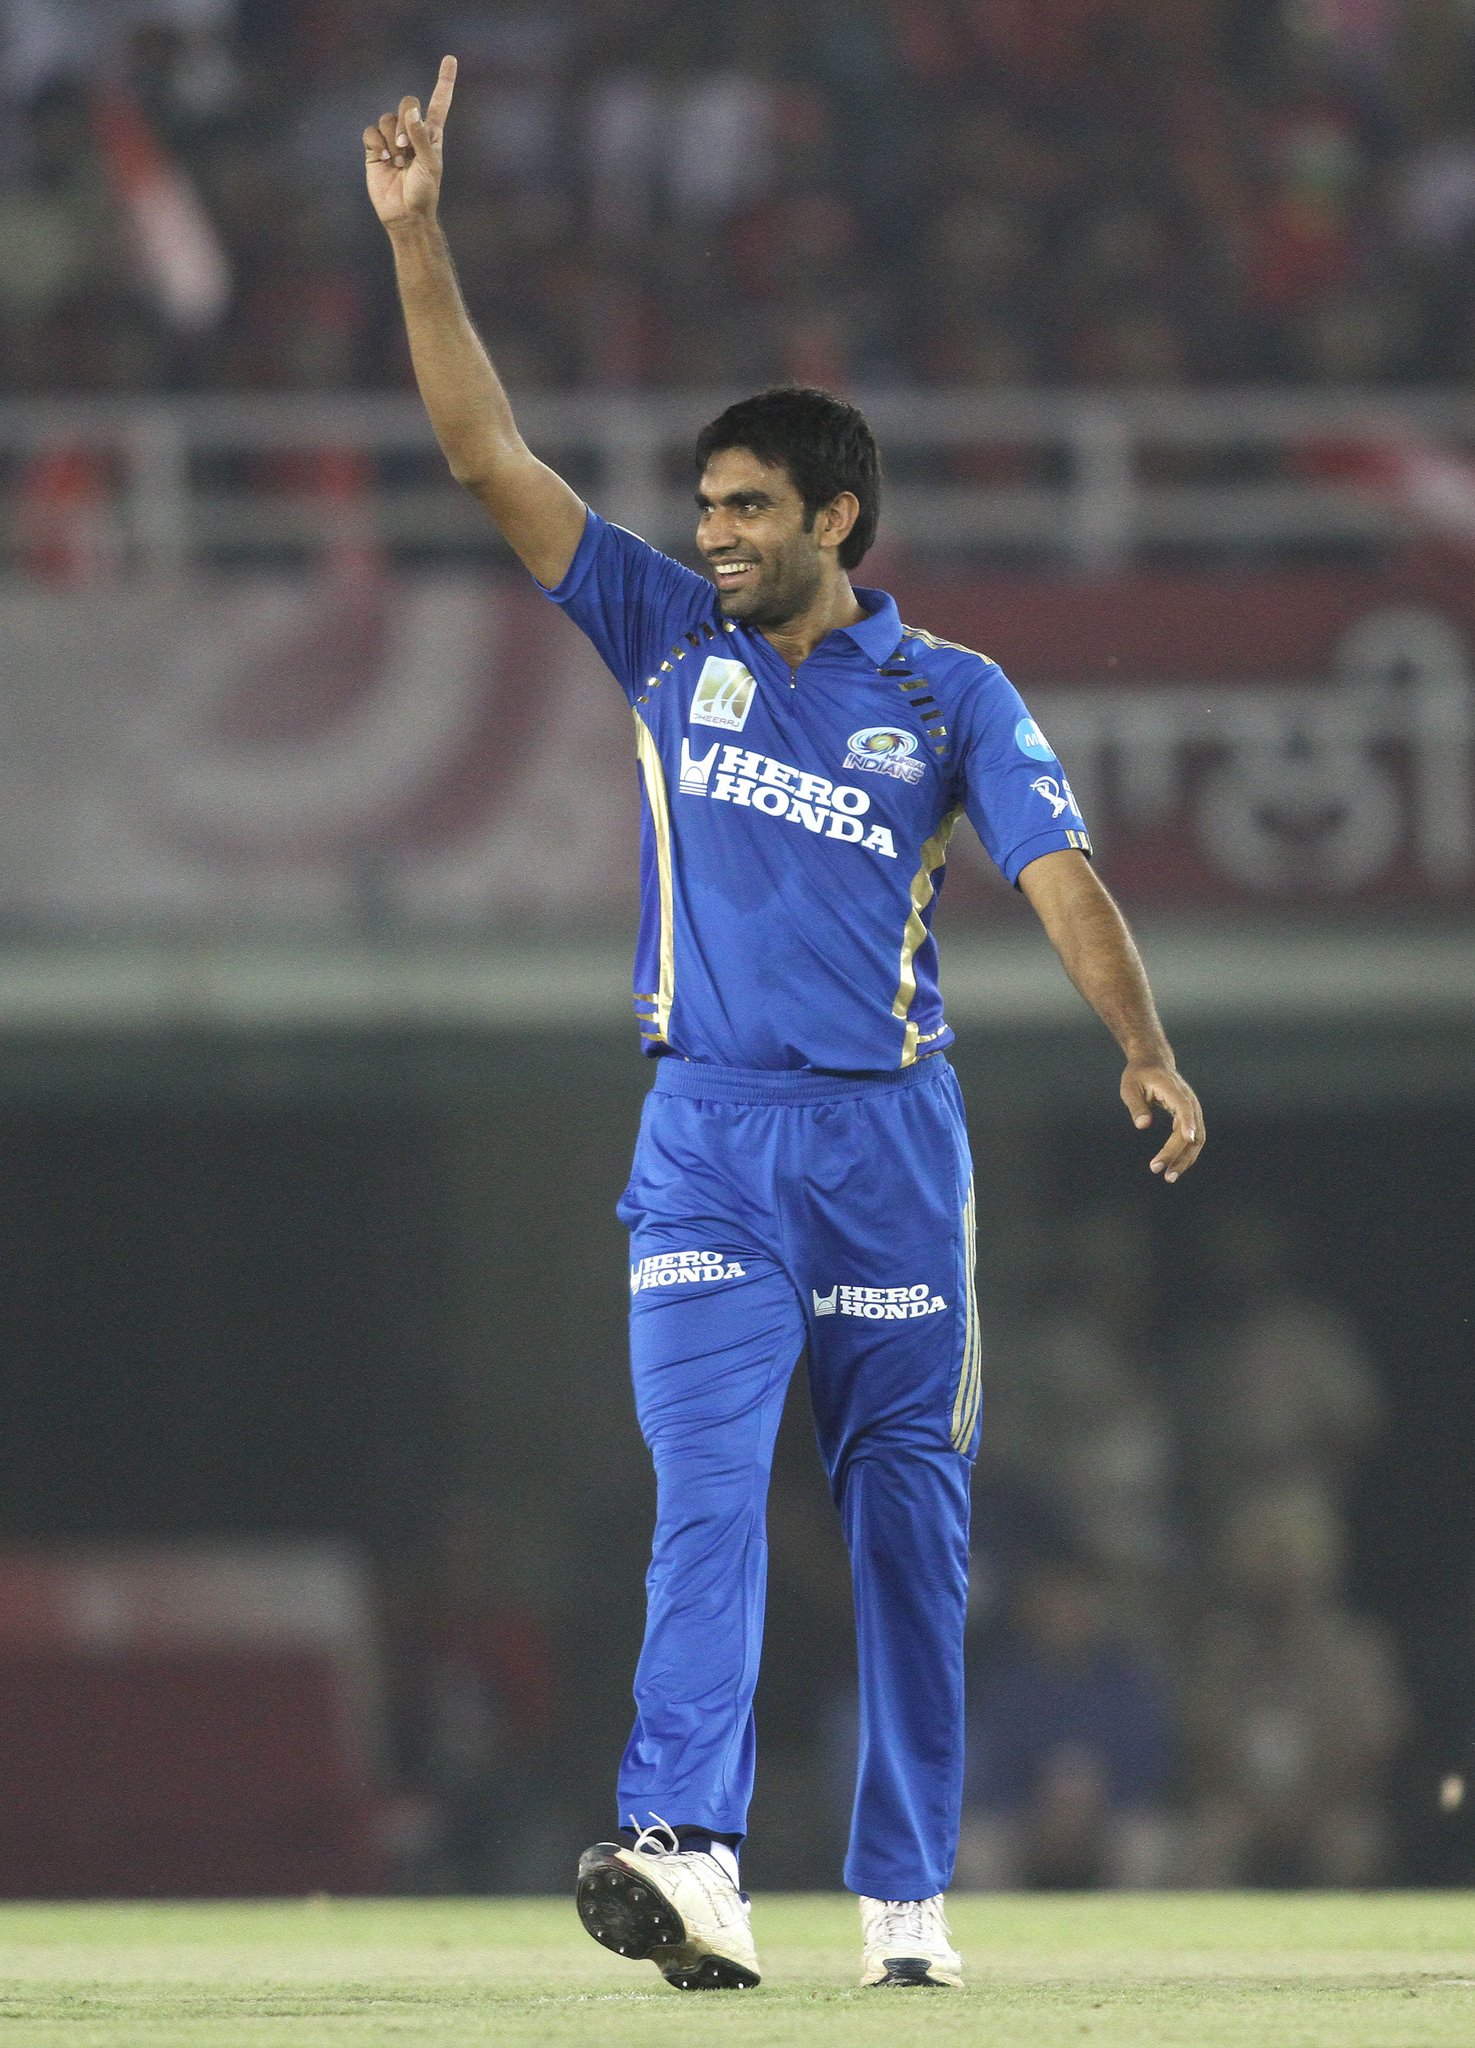 4  0  wickets and 1  IPL title in the MI Blue and Gold!  Happy birthday, Munaf Patel  